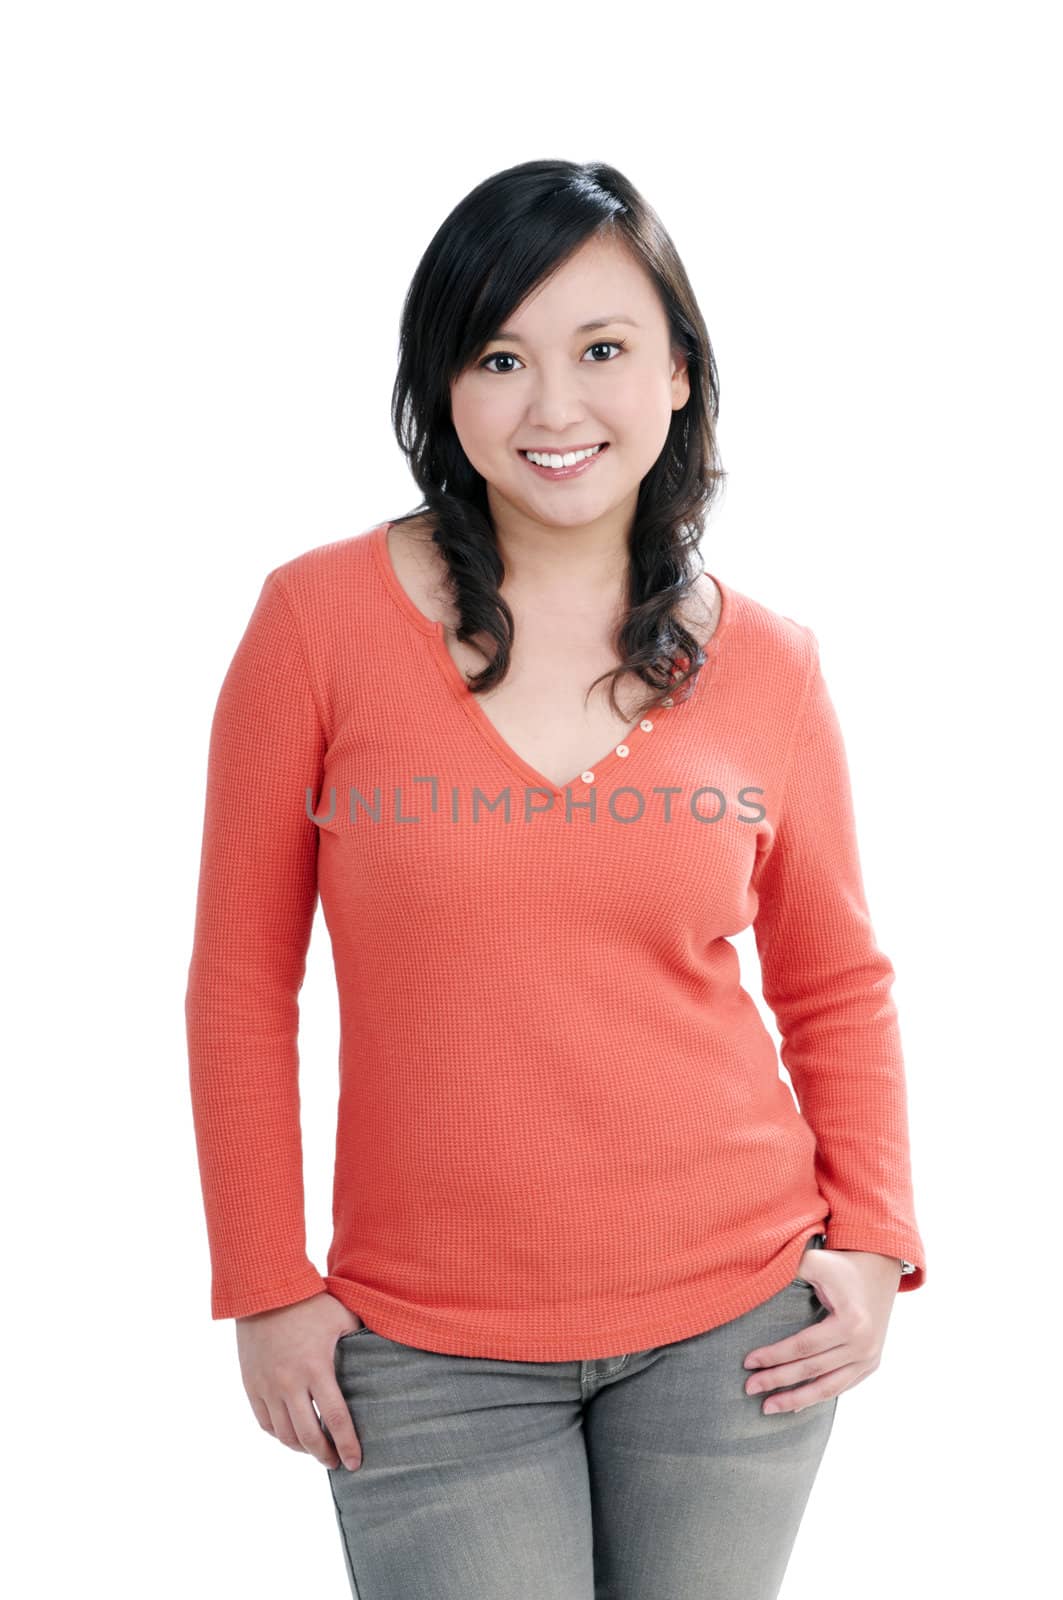 Portrait of an attractive young woman smiling, over white background.